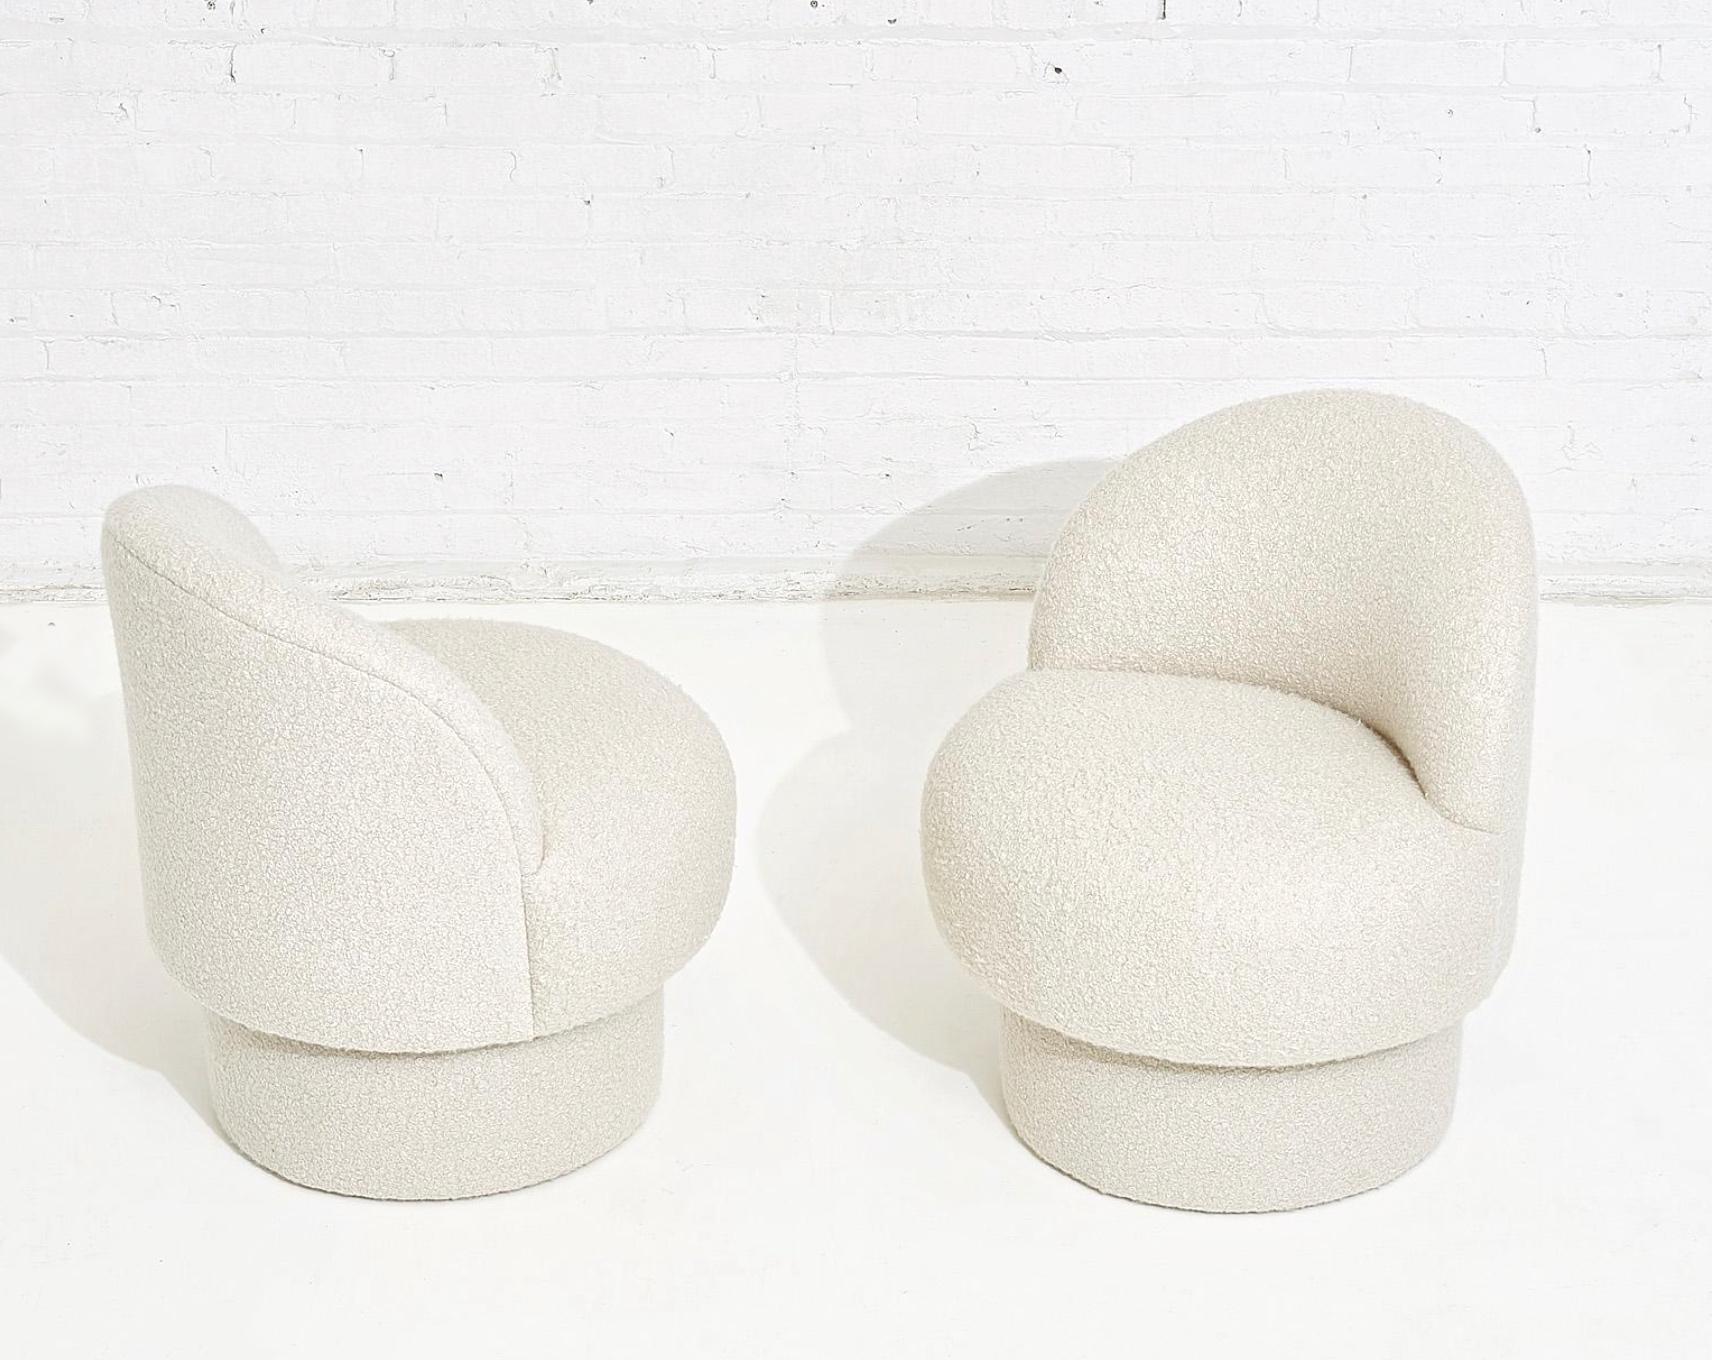 Upholstered in white performance boucle. These are customizable. COM upholstery option available as well.